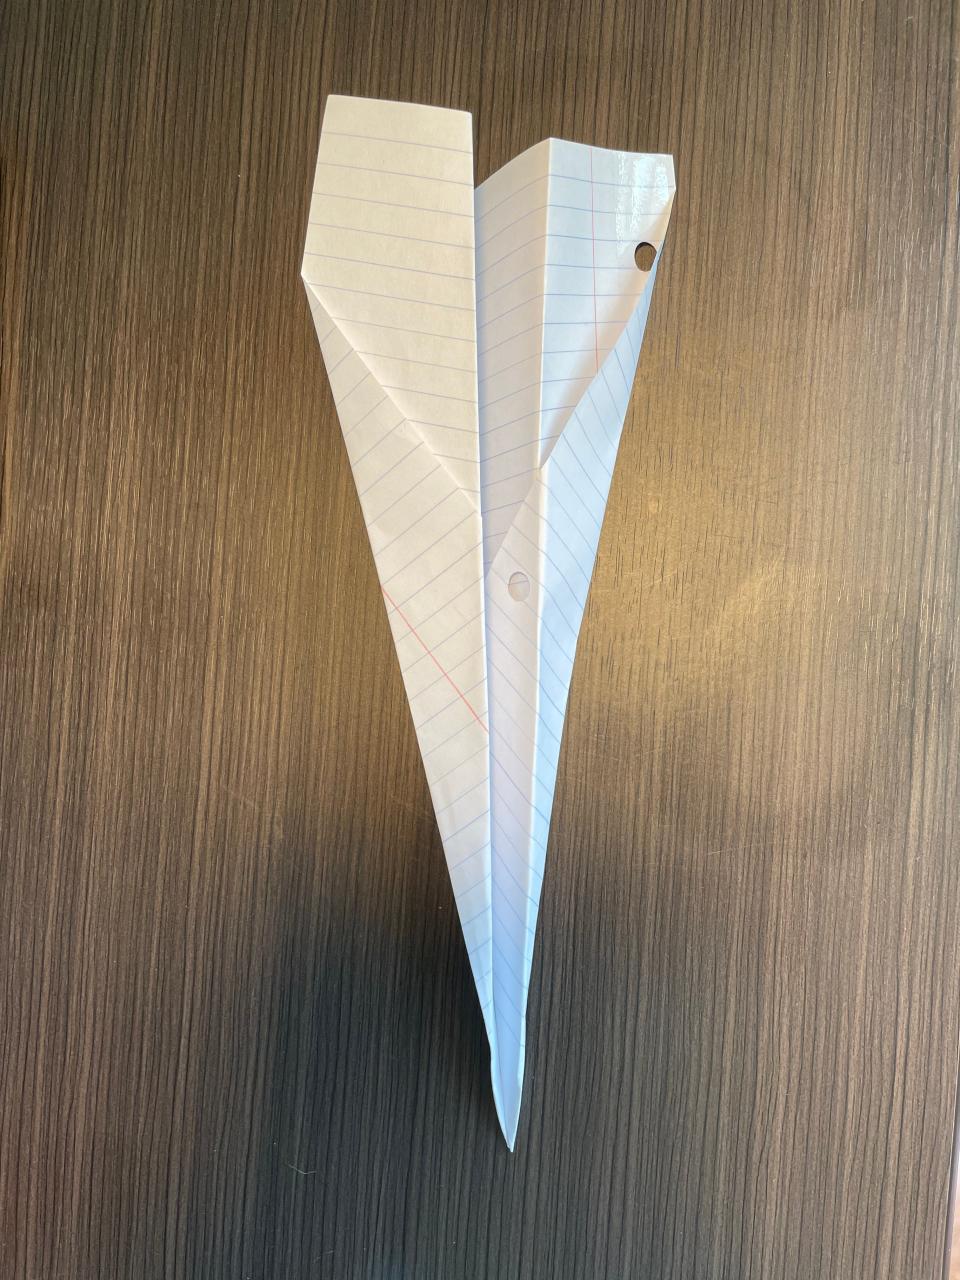 How to make a paper airplane step five